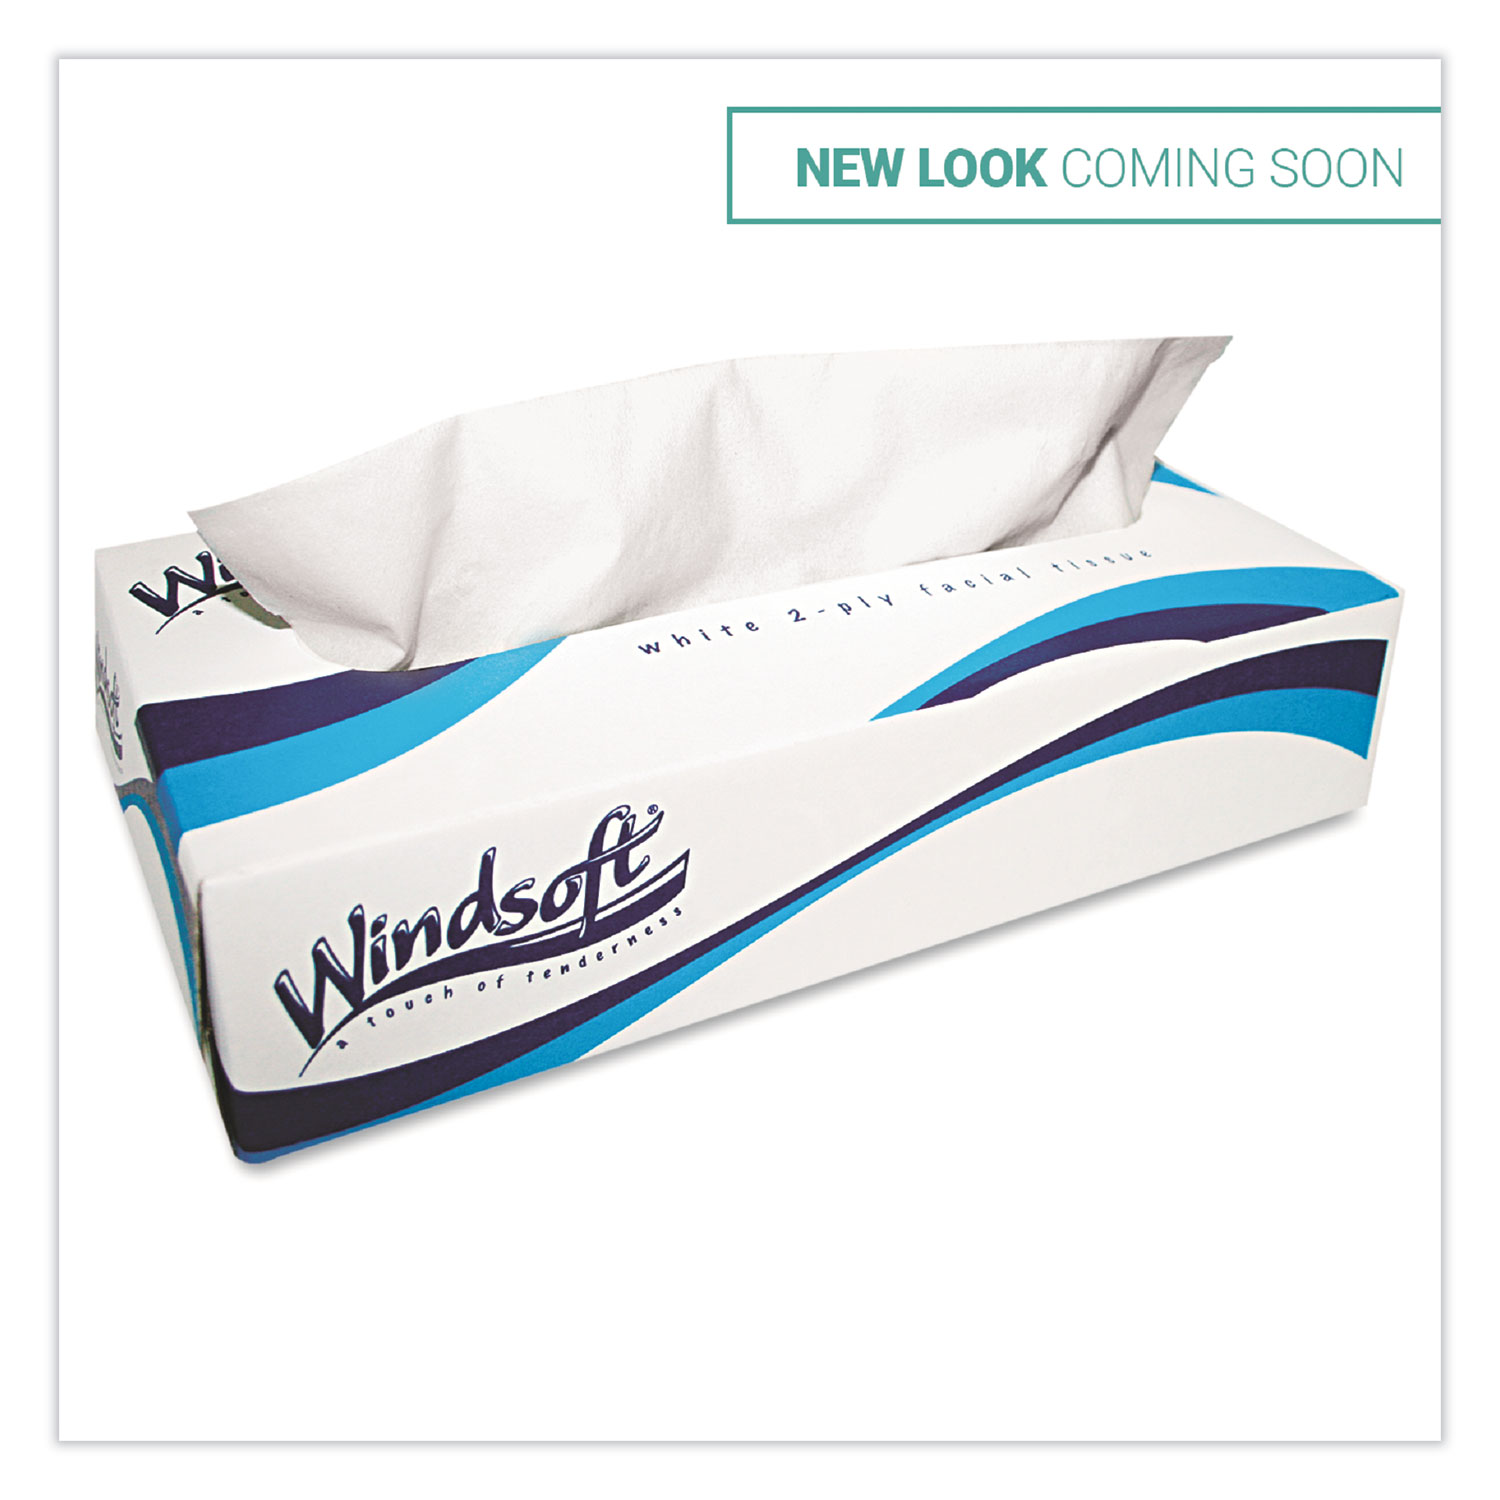  Windsoft WIN2430 Facial Tissue, 2 Ply, White, Pop-Up Box, 100 Sheets/Box, 6 Boxes/Pack (WIN2430) 